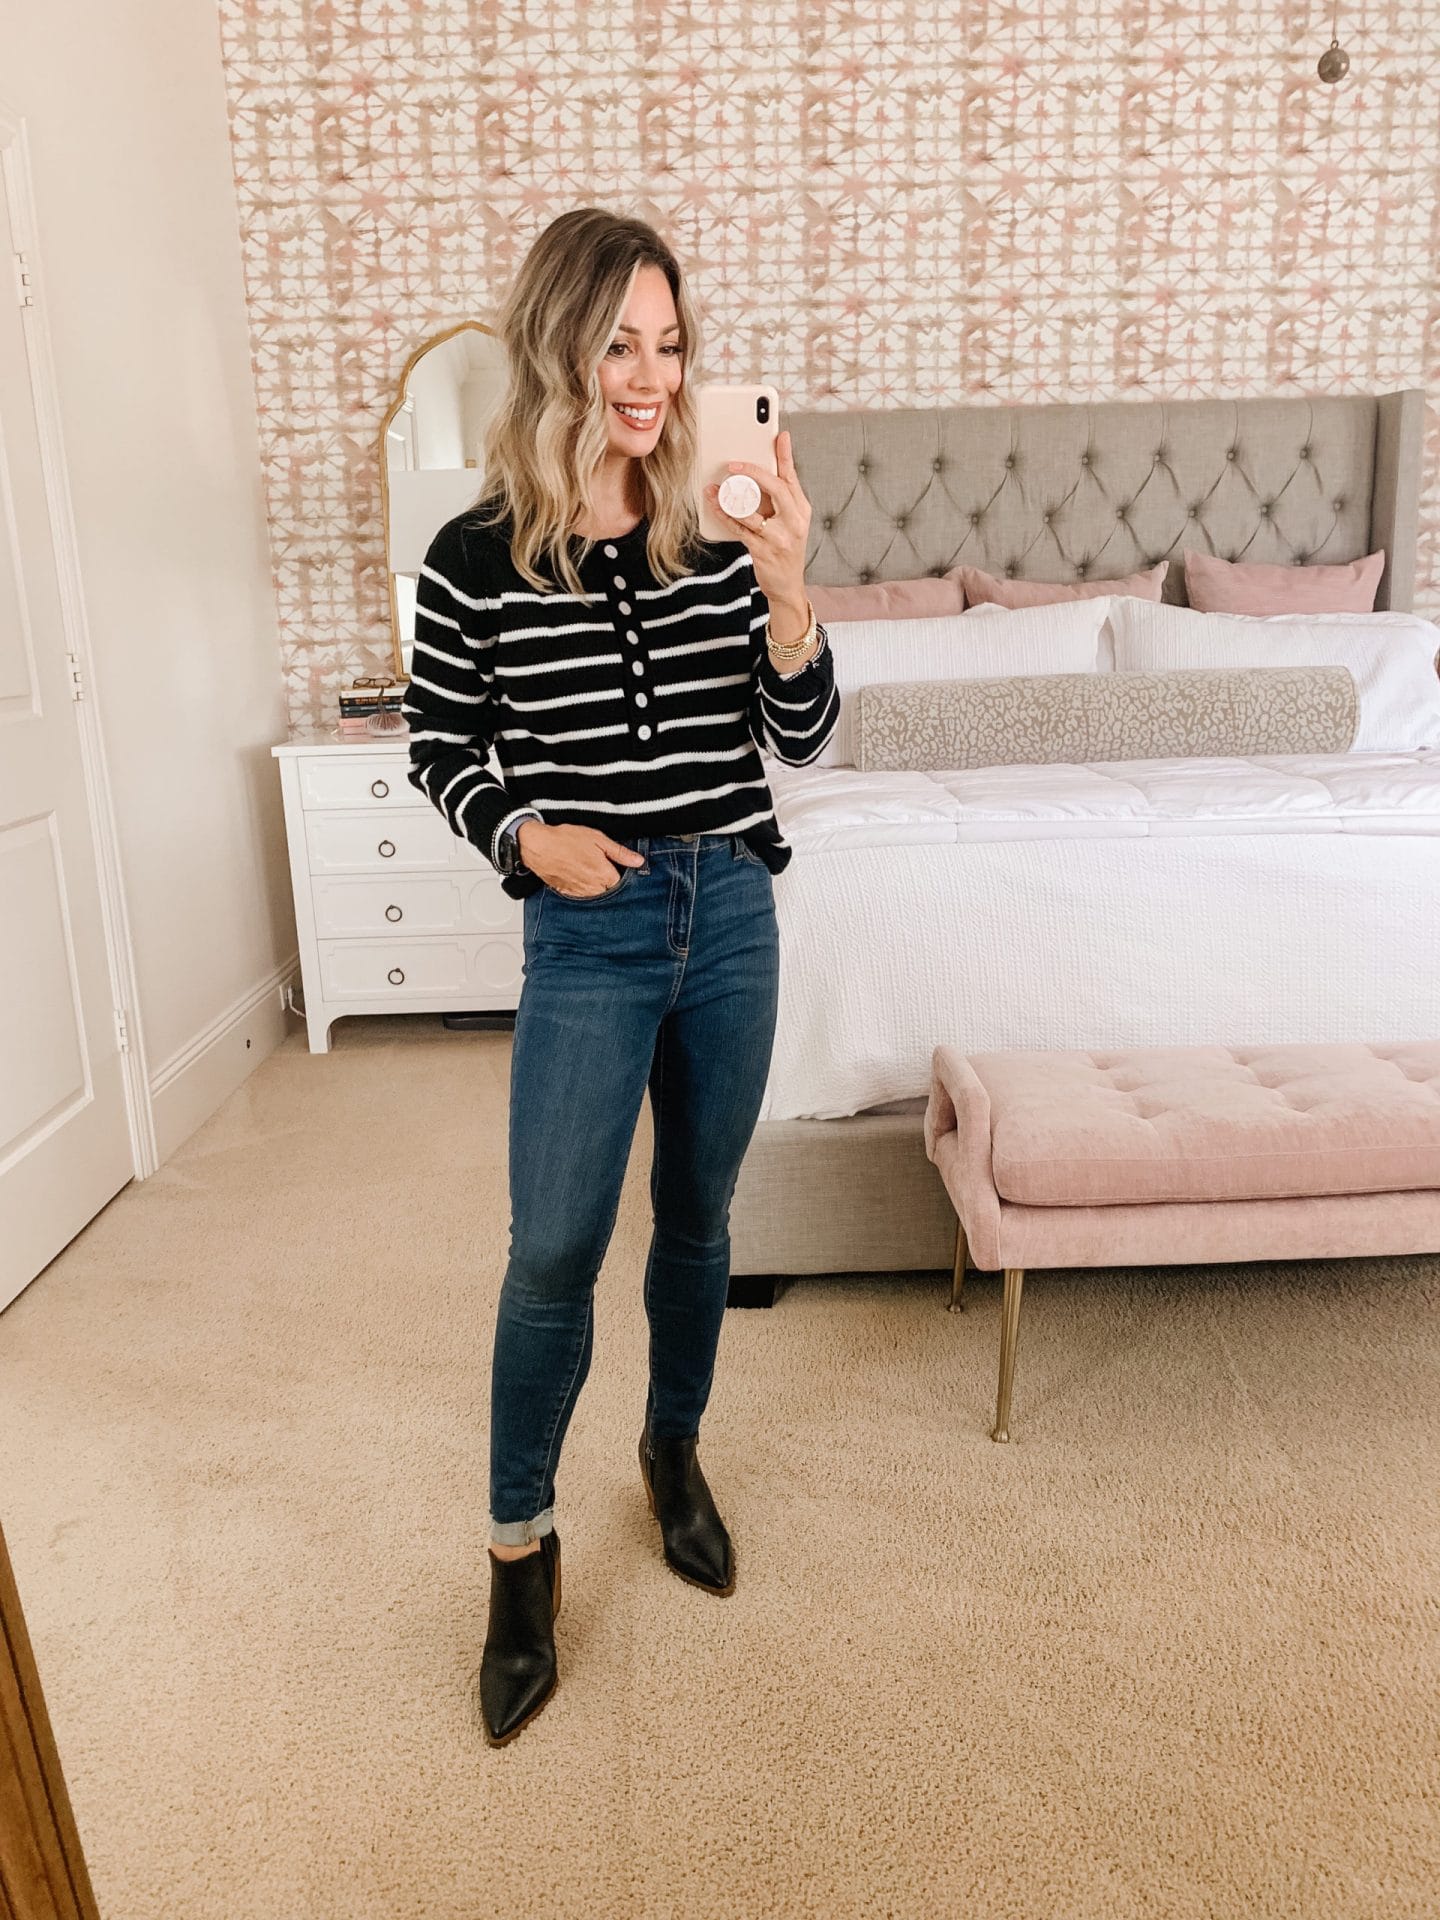 Amazon Fashion, Striped Sweater, Jeans, Booties 